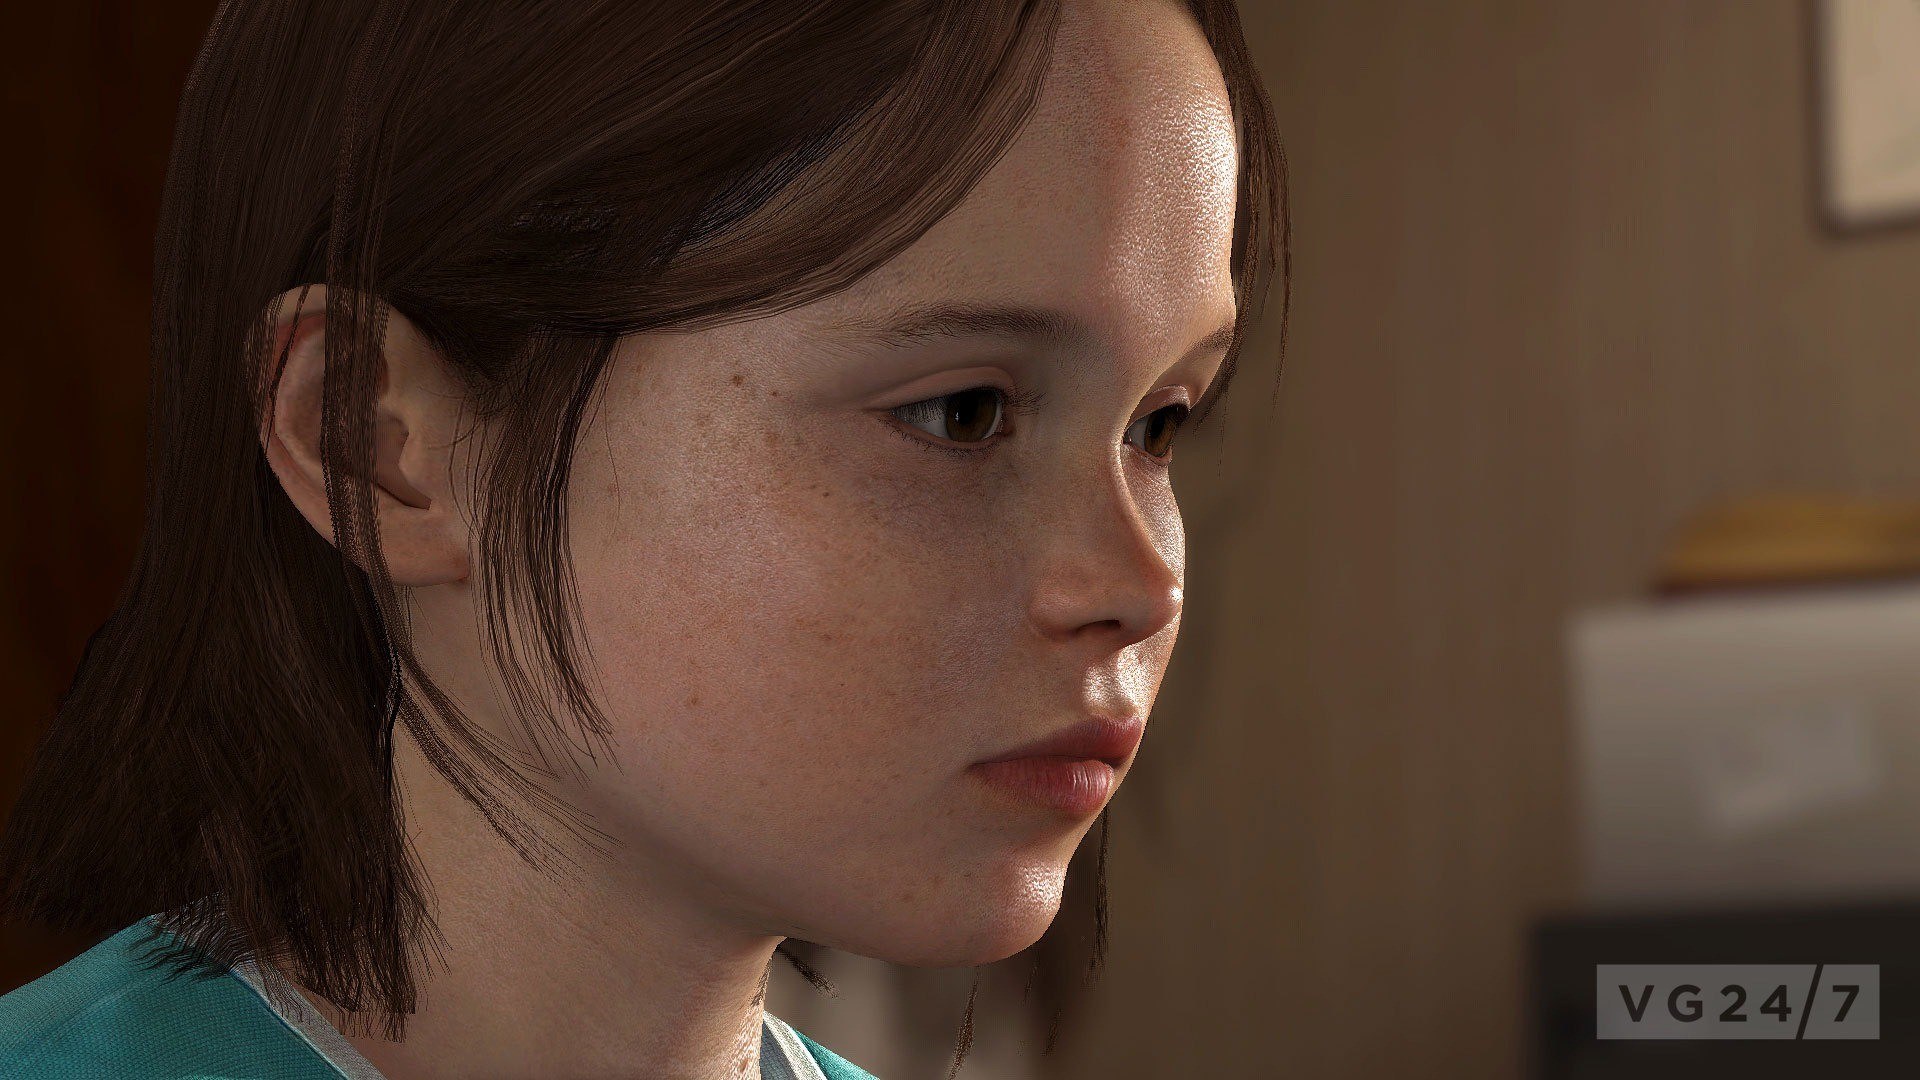 Beyond two souls free game play